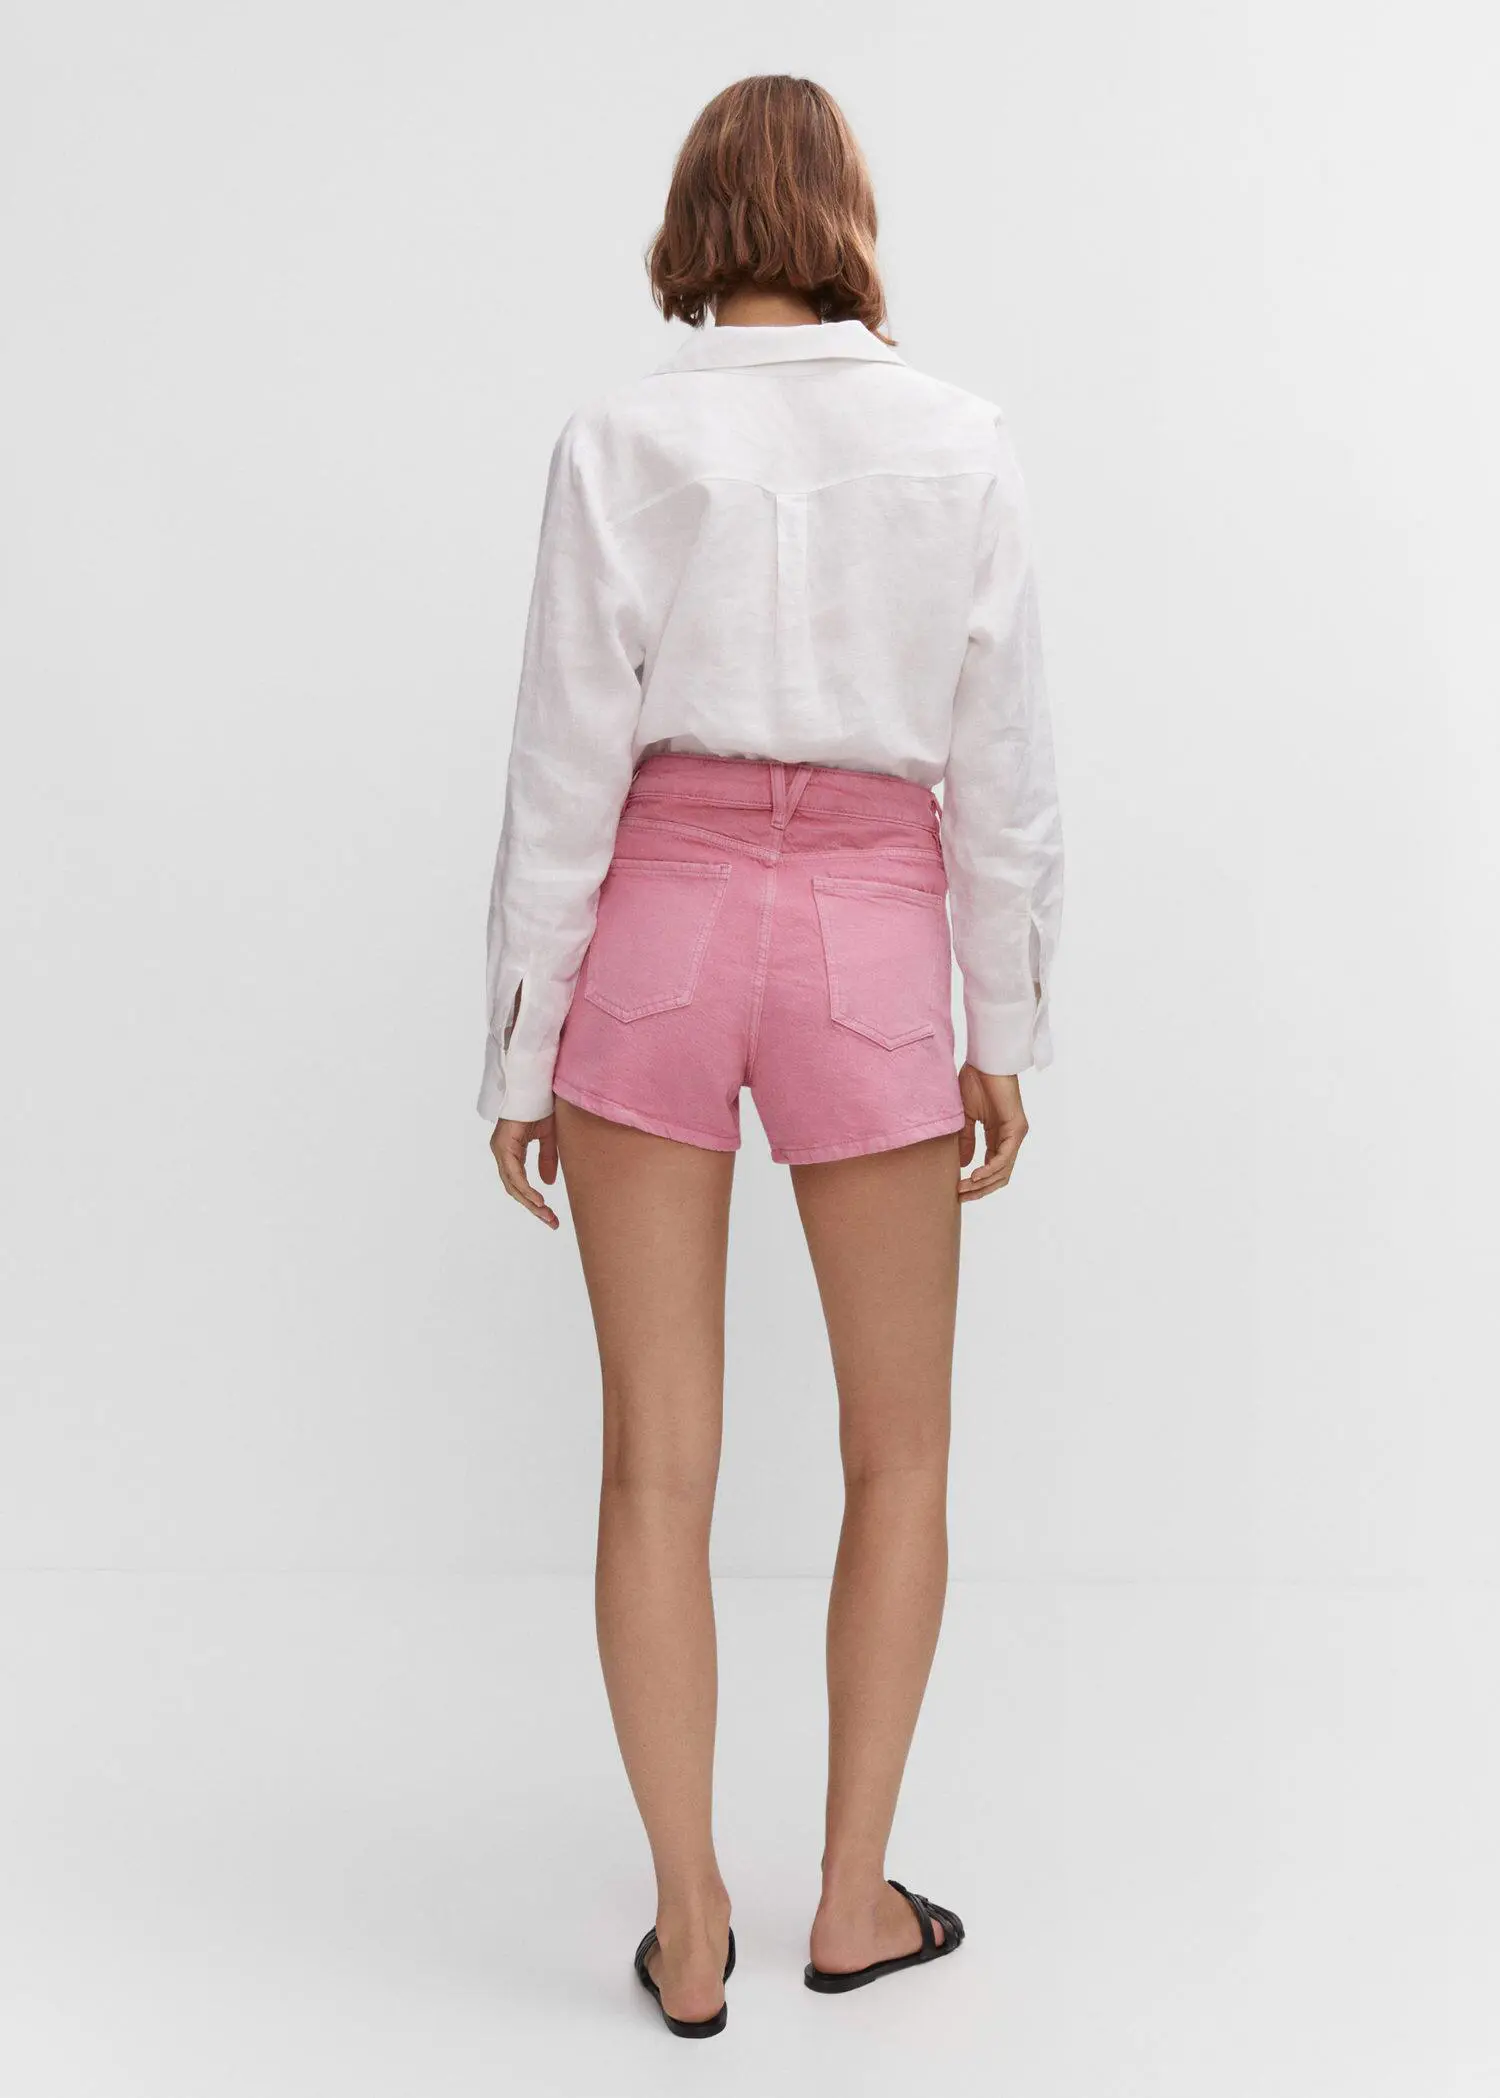 Mango Denim shorts with buttons. a person wearing pink shorts and a white shirt. 